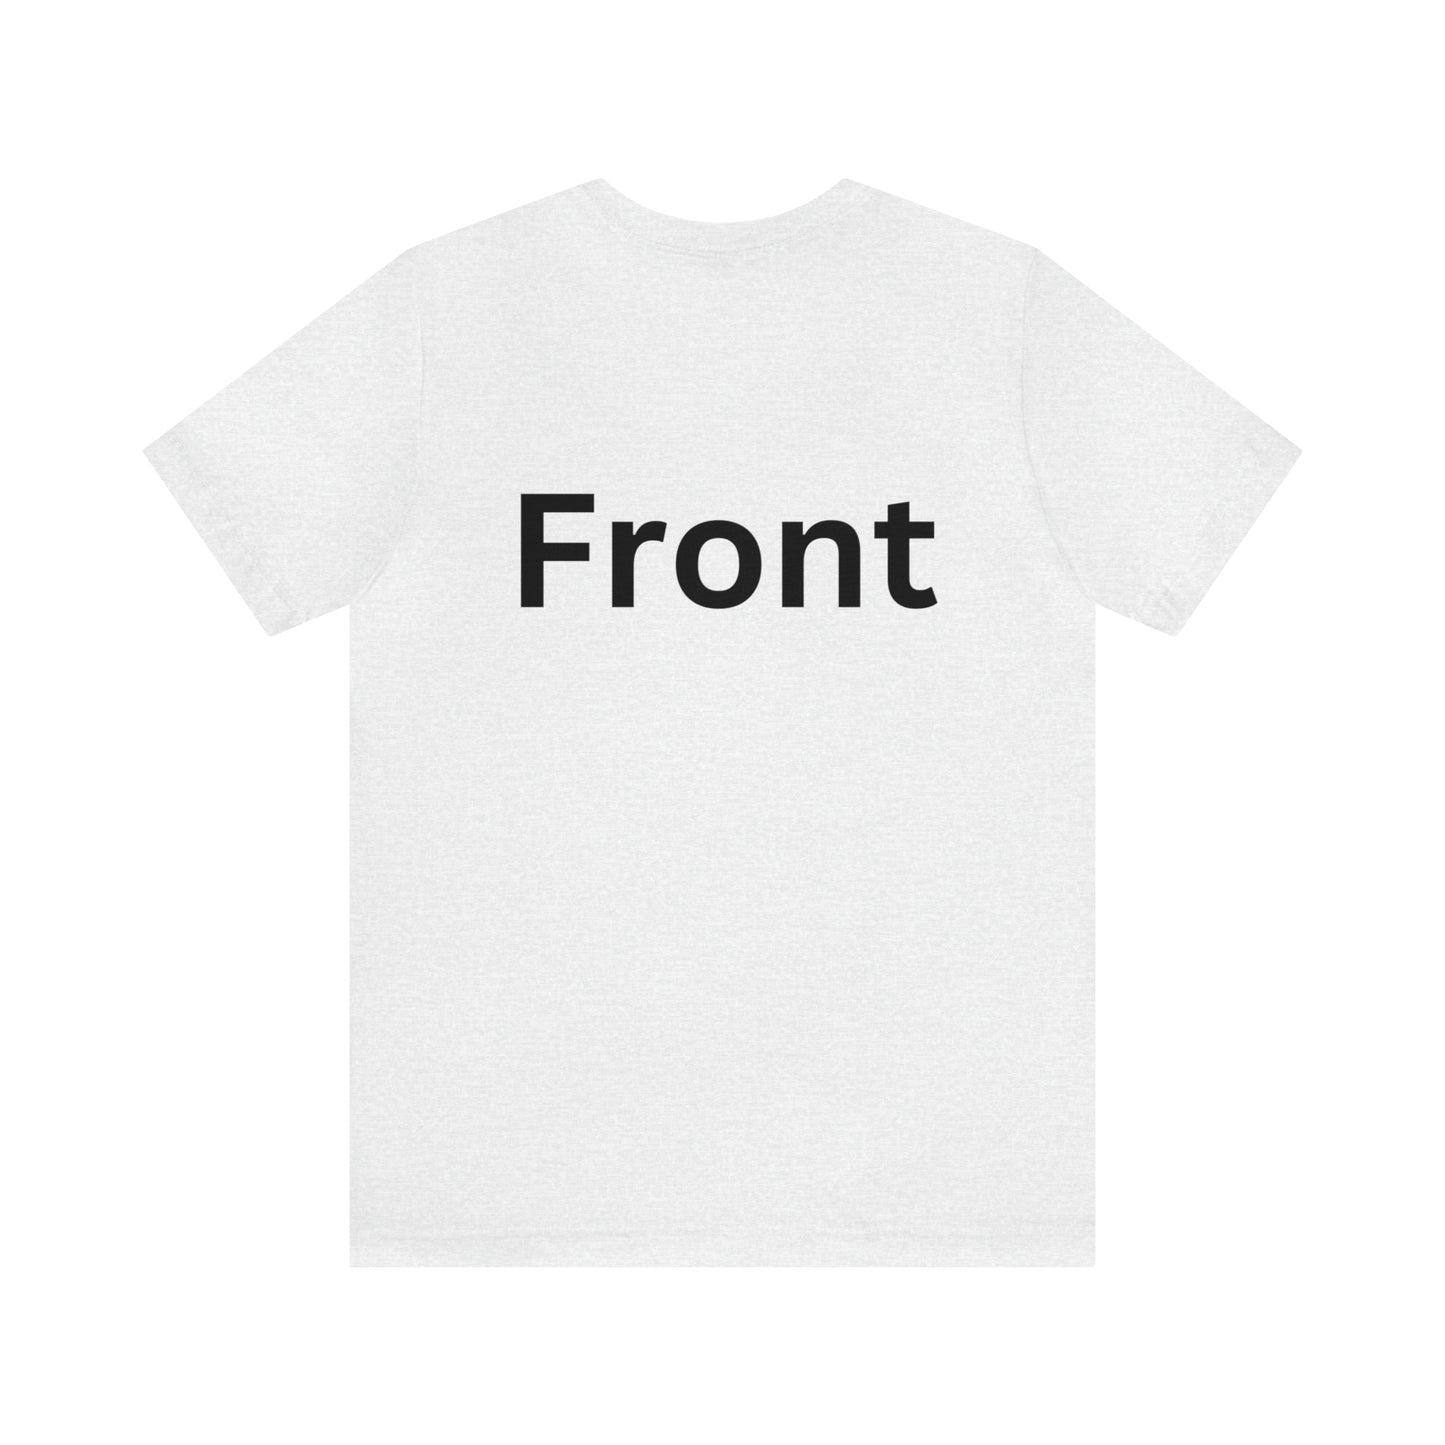 Back to - Front  Unisex Jersey Short Sleeve Tee